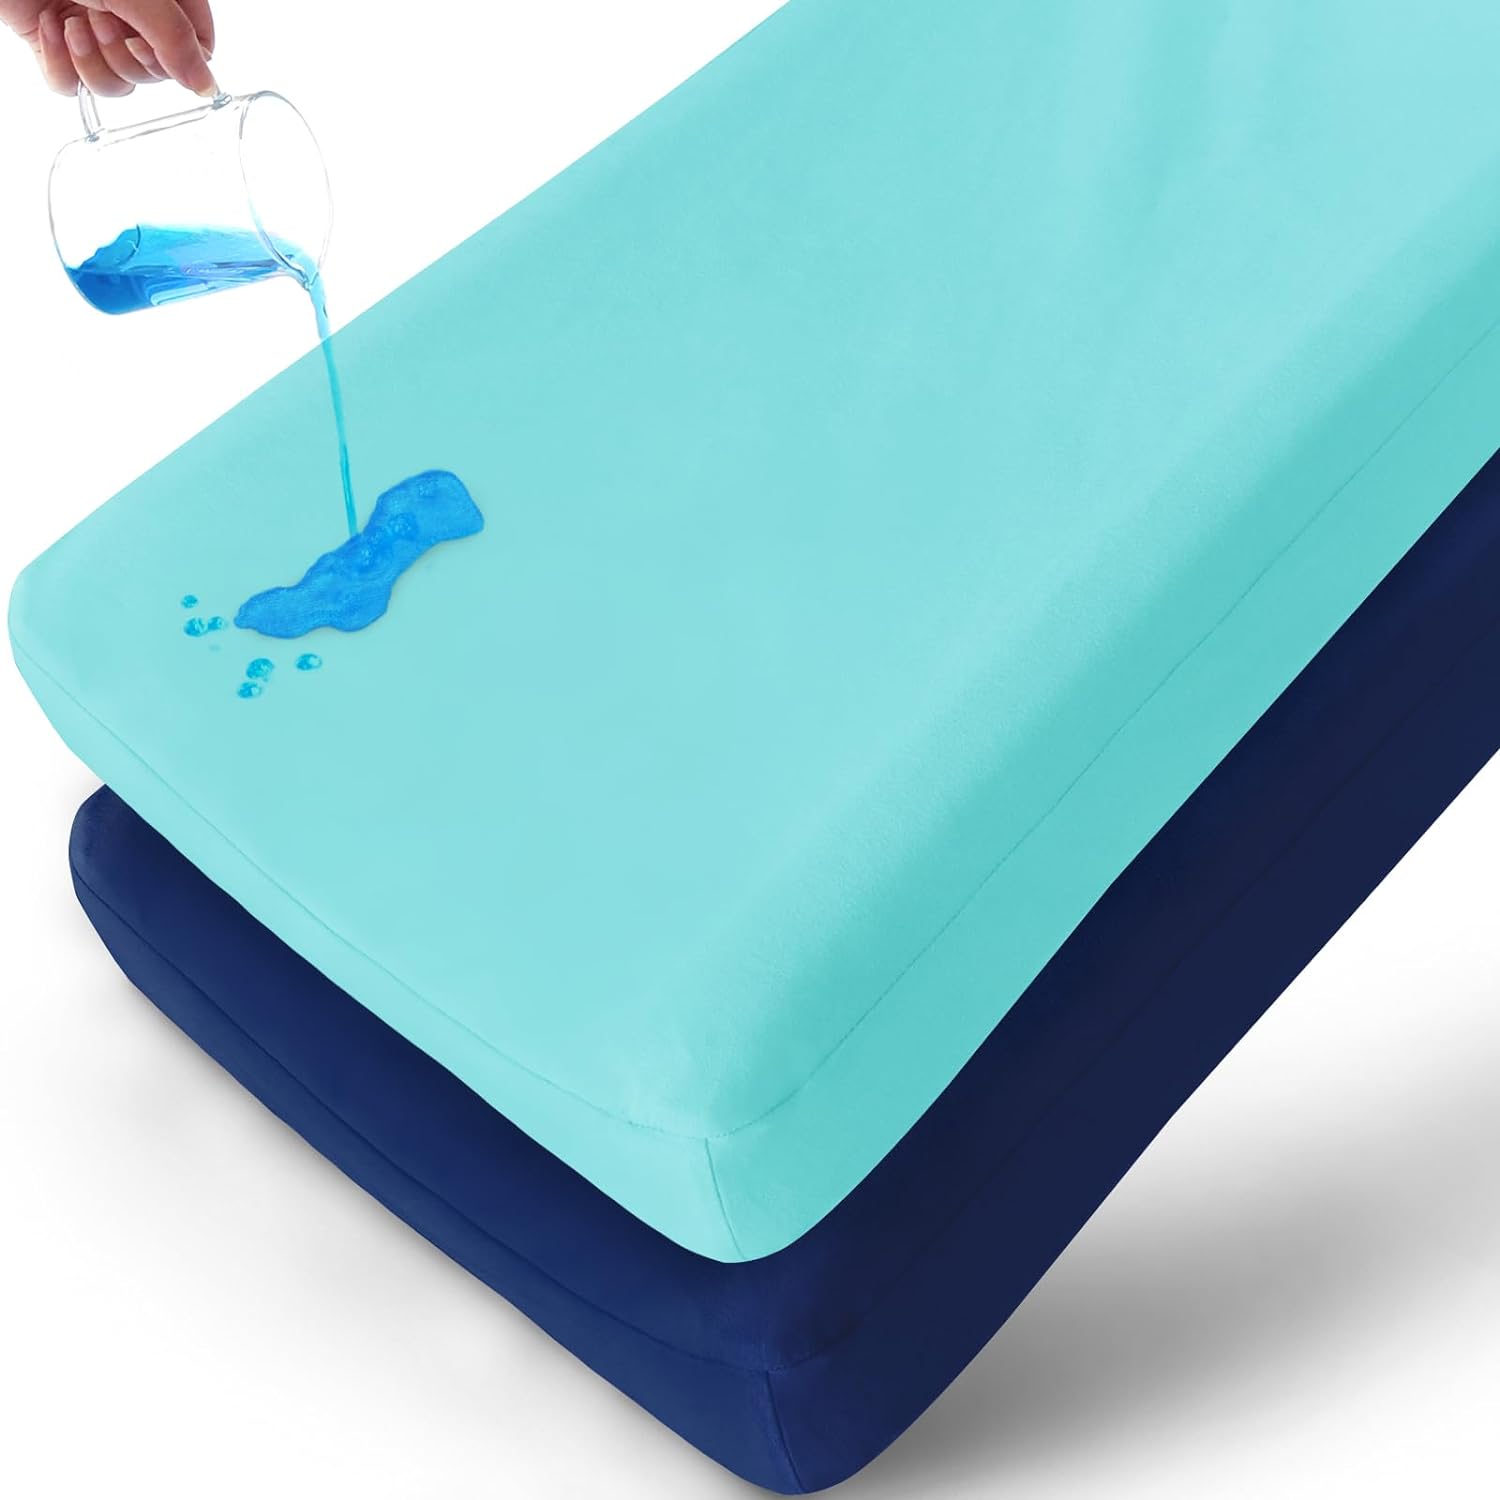 Waterproof Changing Pad Cover - 2 Pack, Ultra-Soft Microfiber, Smooth & Breathable, Aqua & Navy - Biloban Online Store